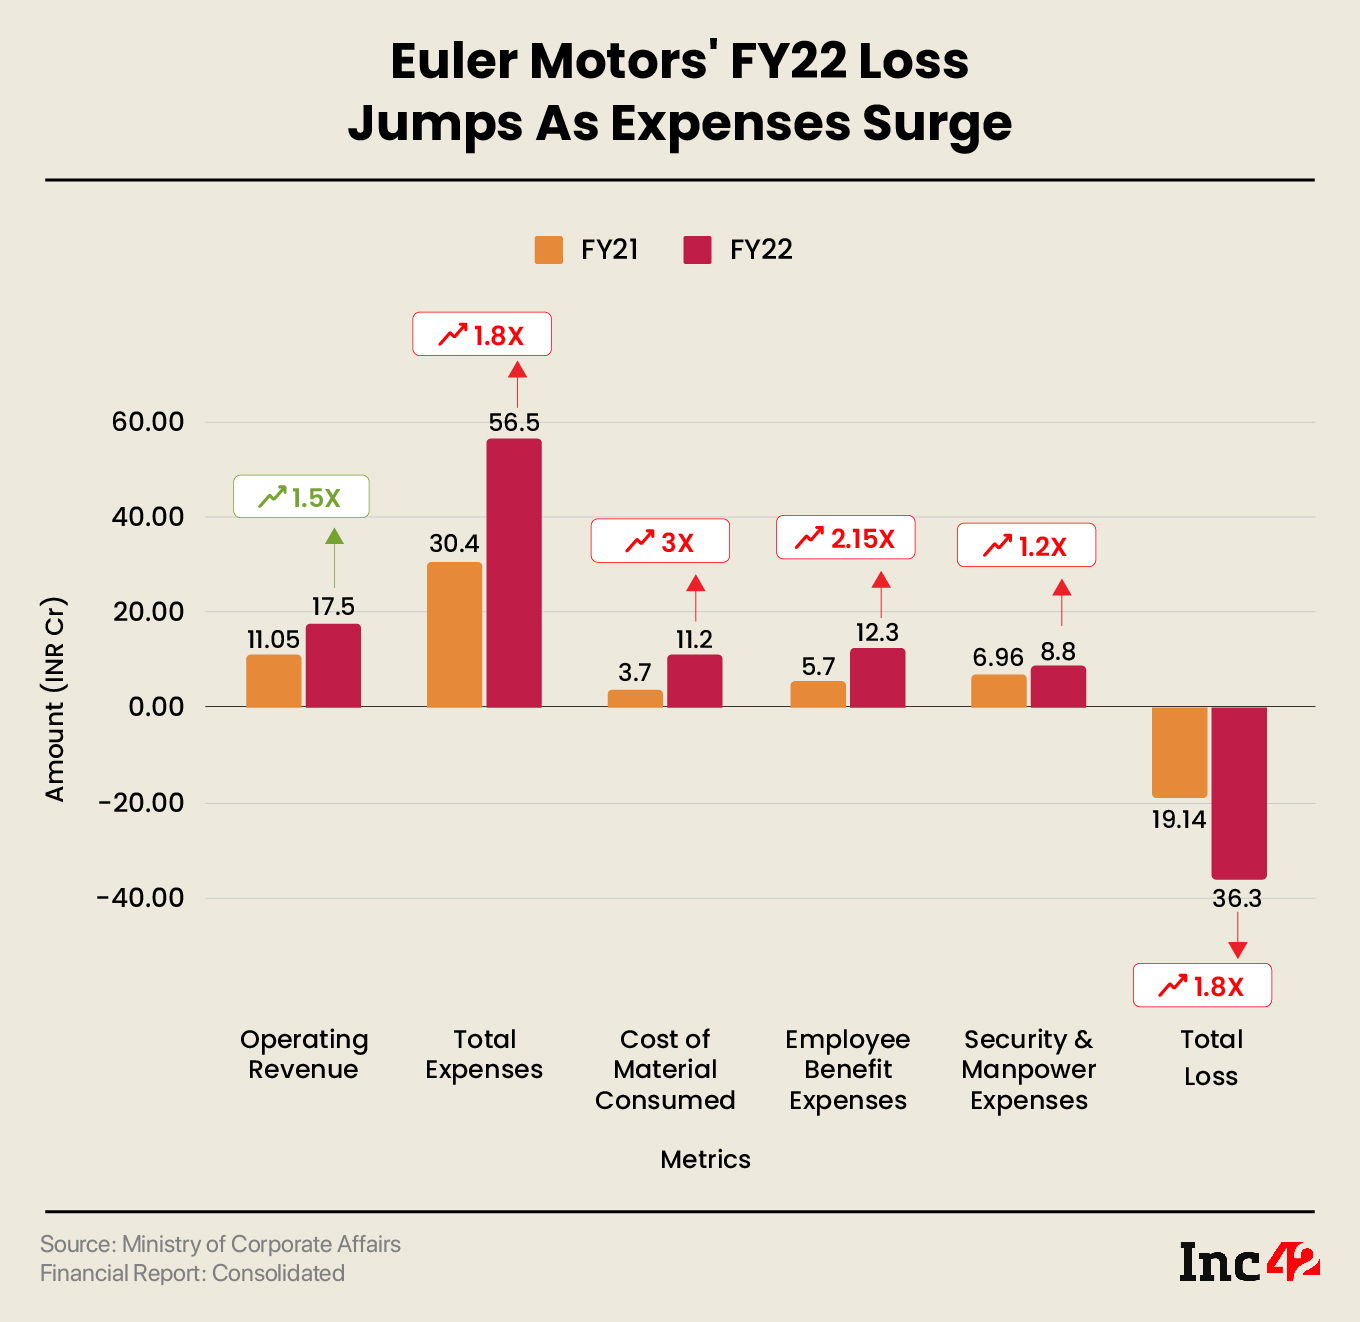 GIC-Backed Euler Motors’ FY22 Loss Jumps 1.9X To INR 36.3 Cr, Sales Rise 1.5X YoY